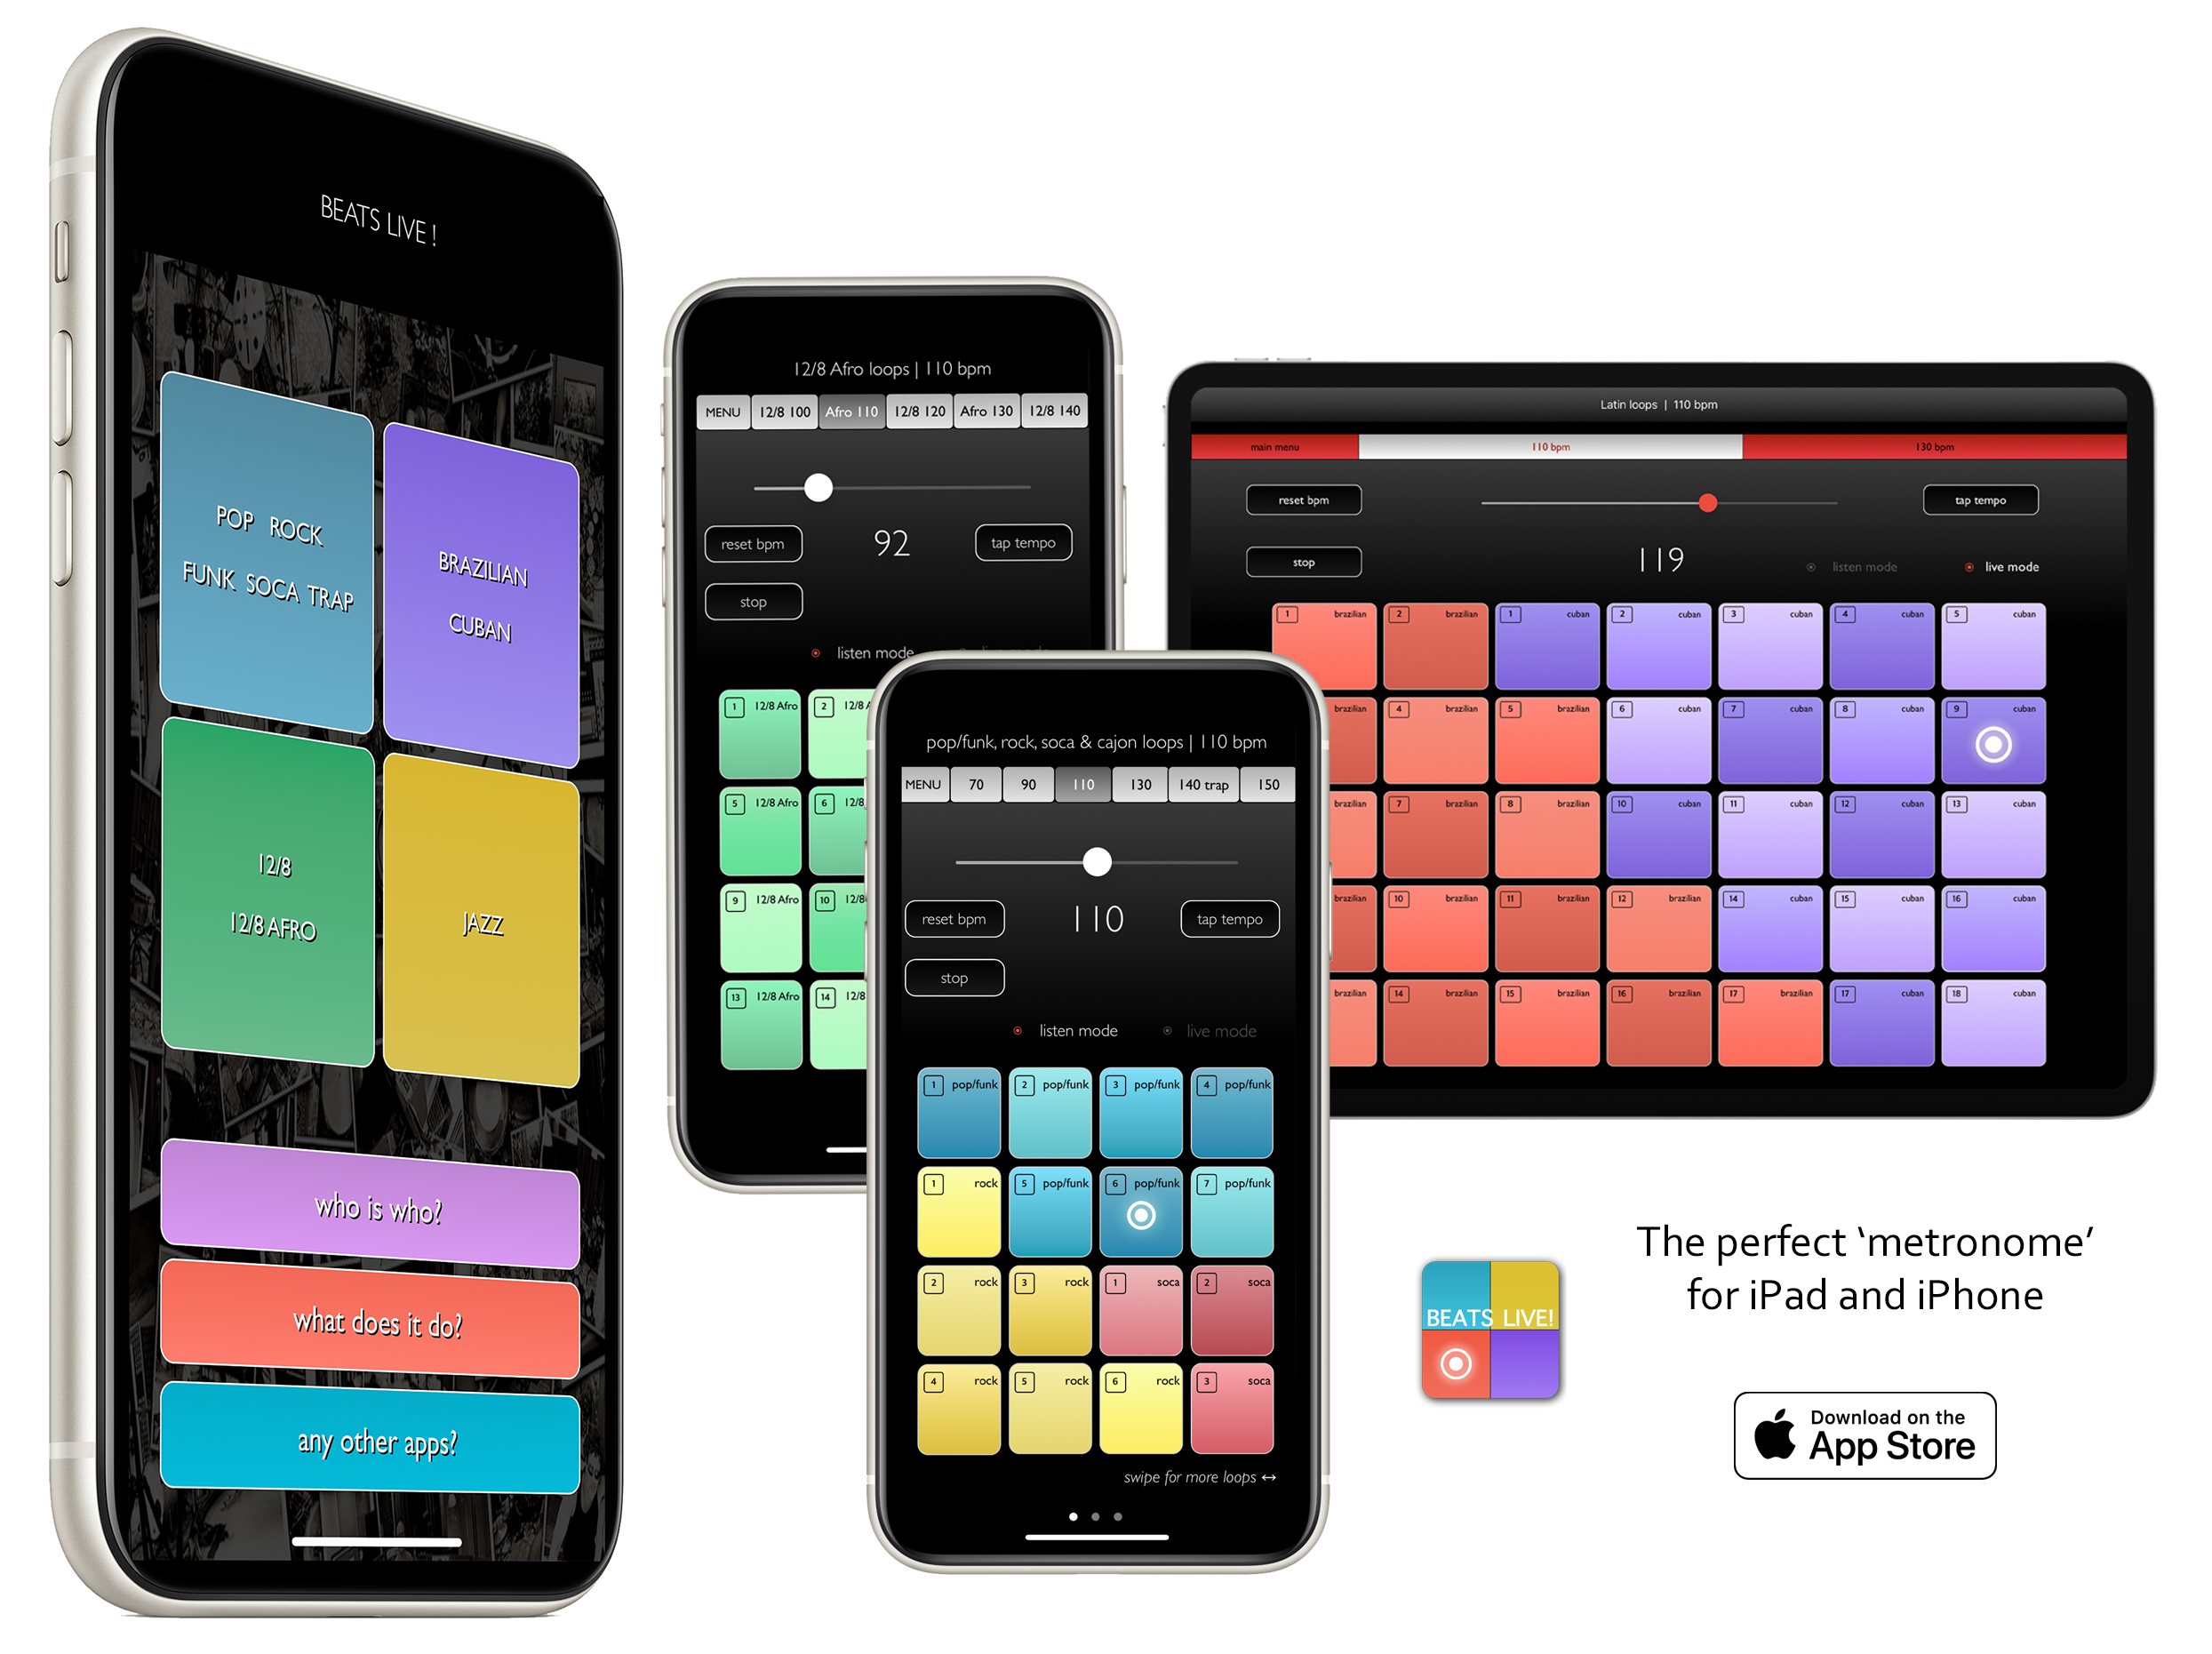 Beats Live! for iPhone and iPad'